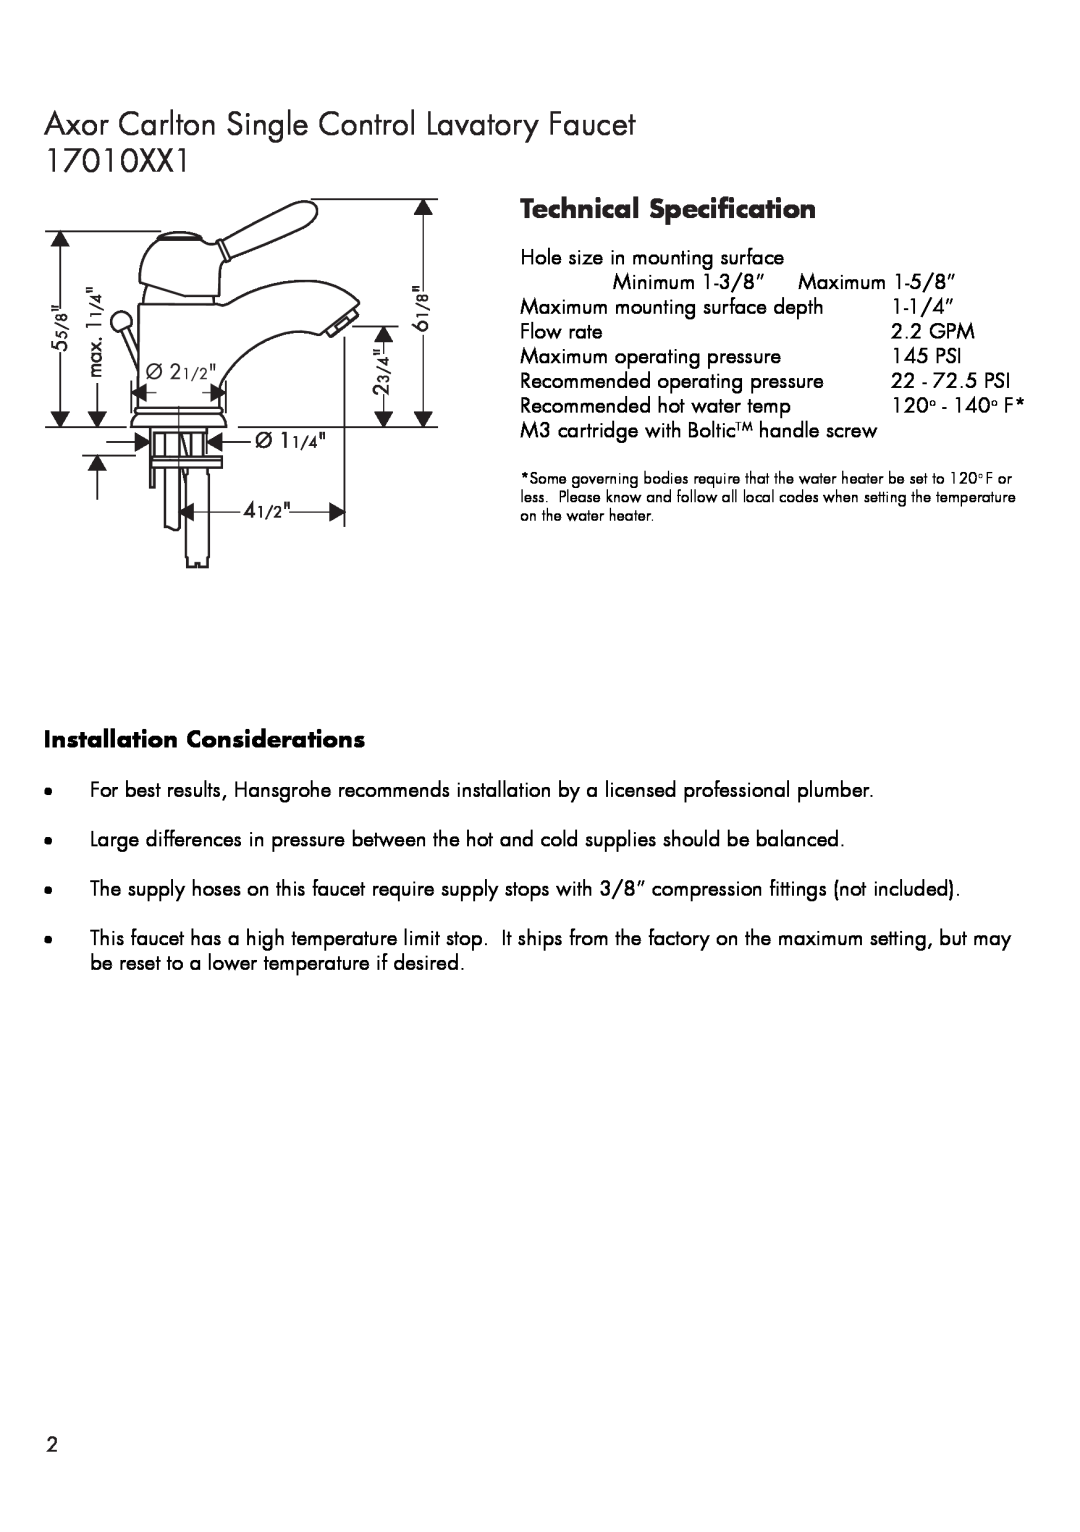 Hans Grohe 17010XX1 Technical Specification, Axor Carlton Single Control Lavatory Faucet, Installation Considerations 